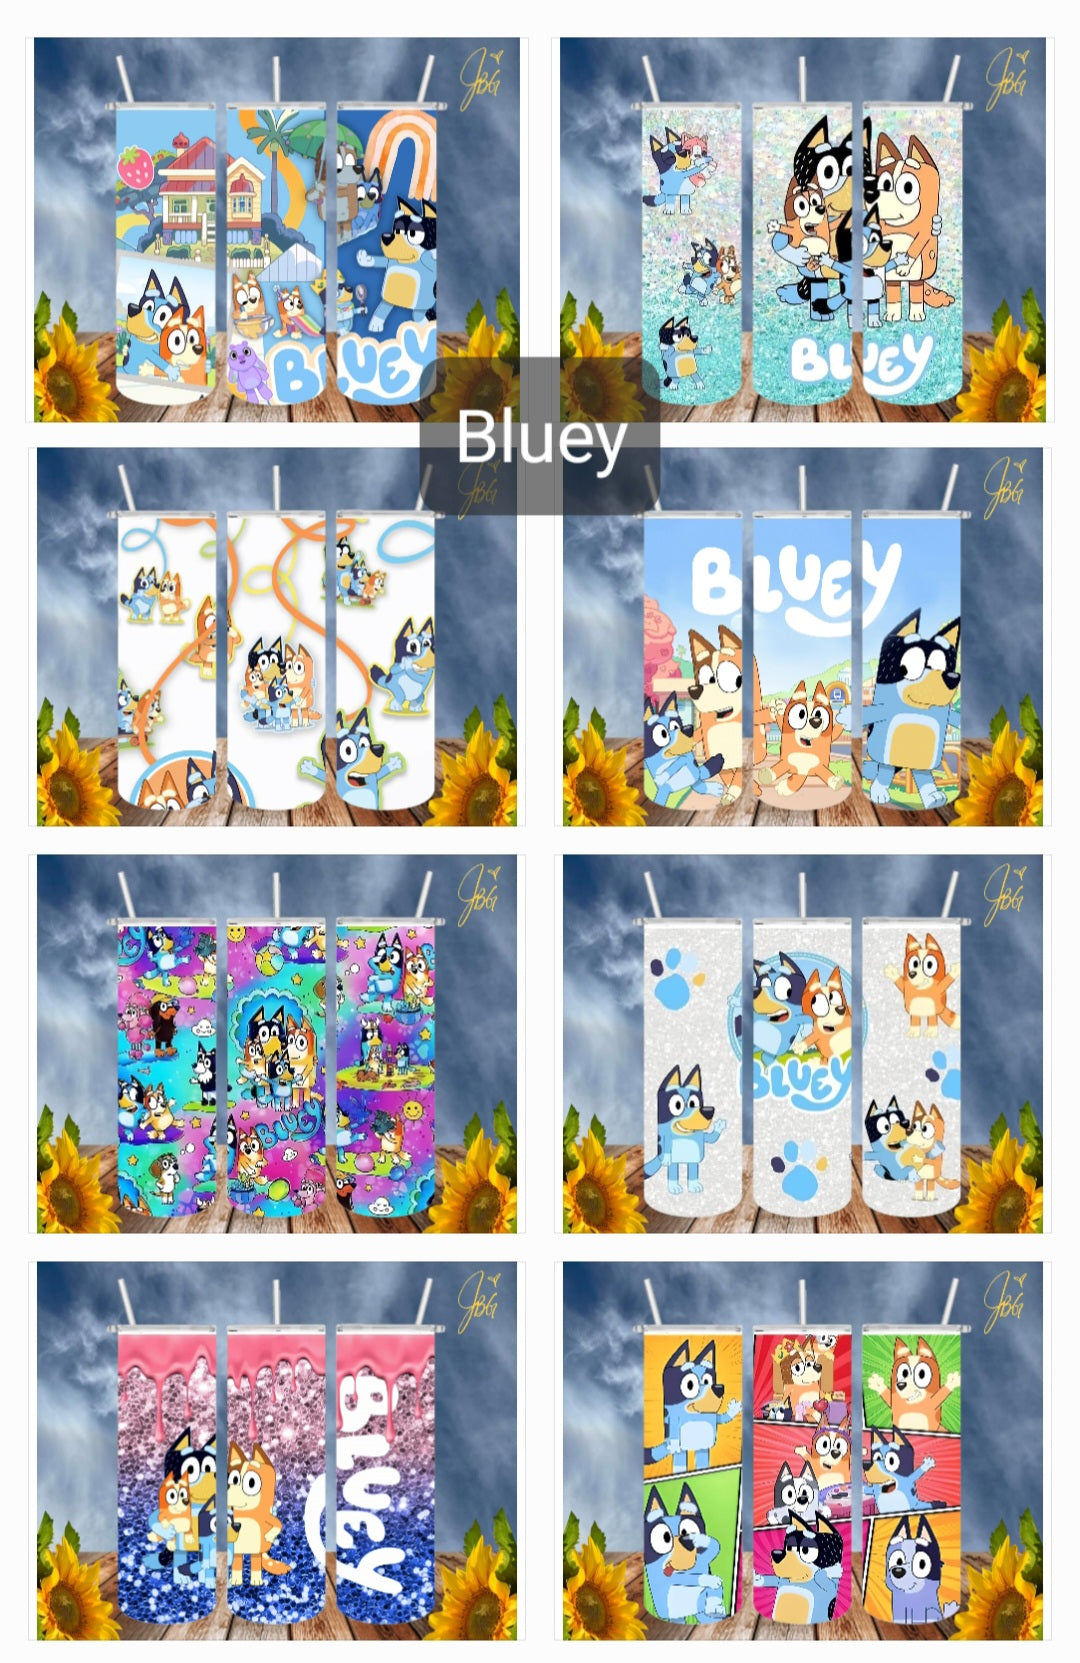 Bluey kids tumblers/cups at Target! #fyp #bluey #blueythemesong #blue